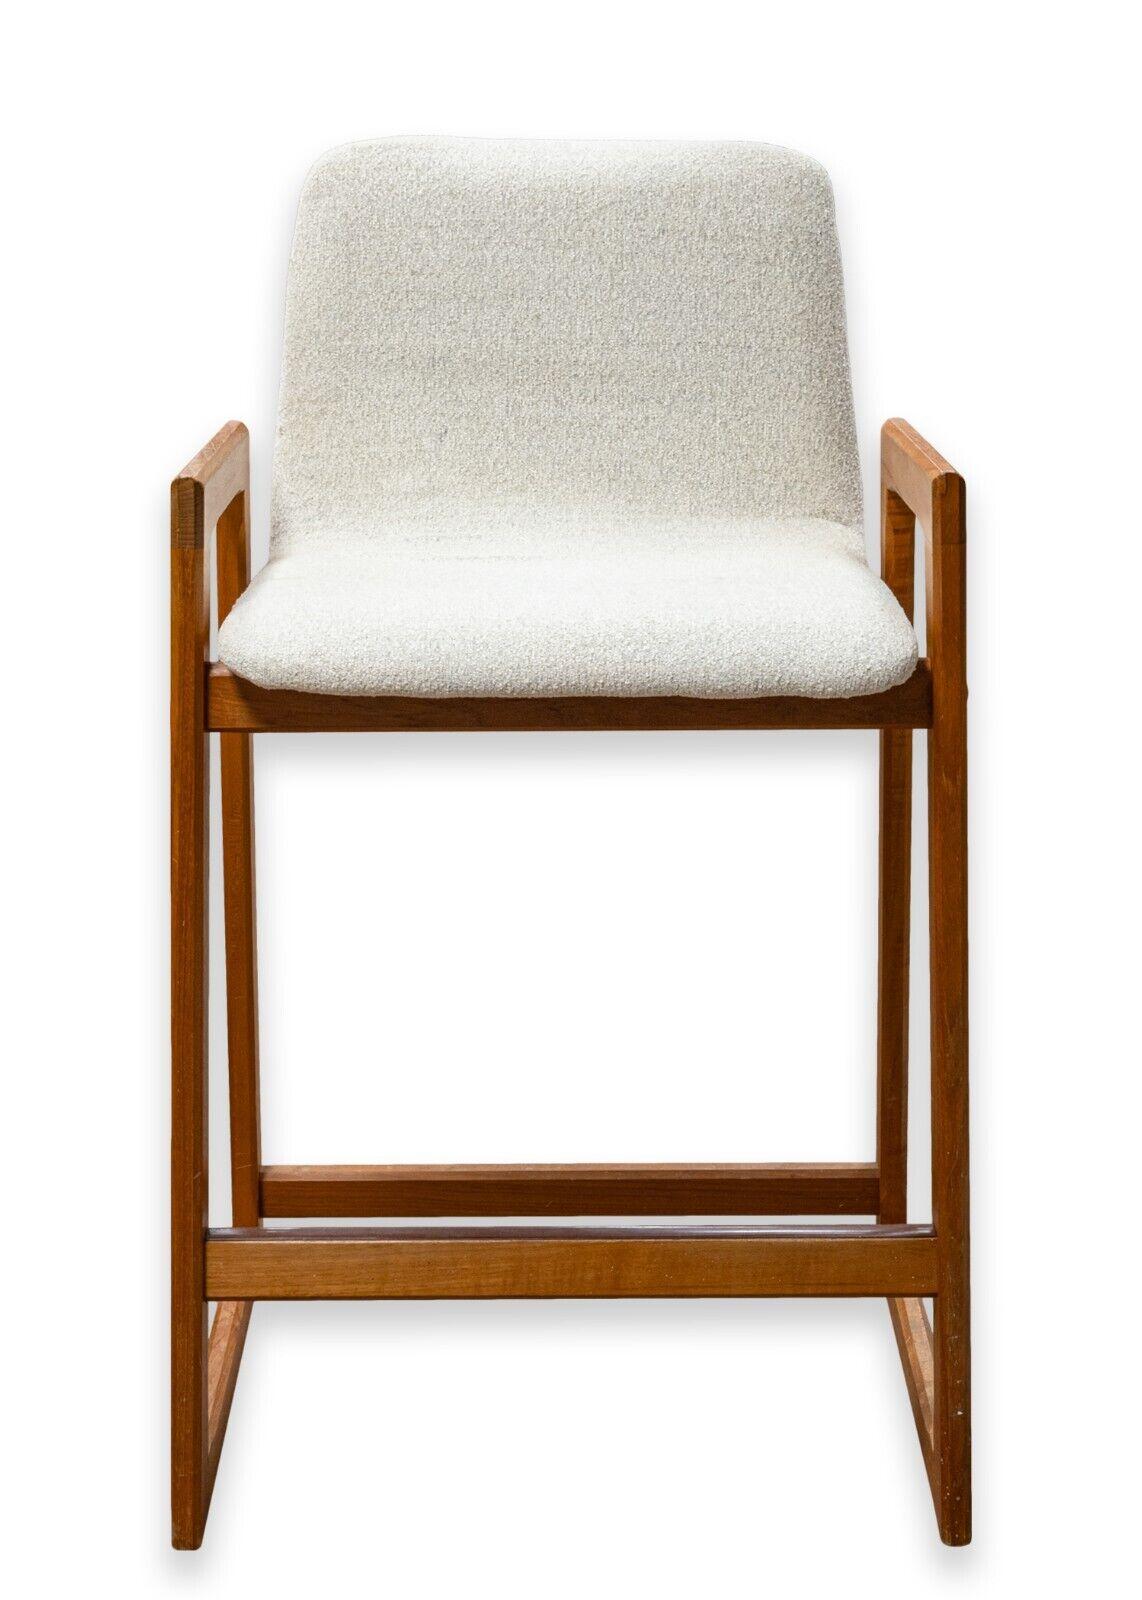 A pair of vintage mid century modern Danish barstools. A beautiful pair of Danish barstools featuring a gorgeous teak wood frame, and a white fabric upholstery. These chairs boast a wonderful silhouette with unique angular shapes and rounded edges.